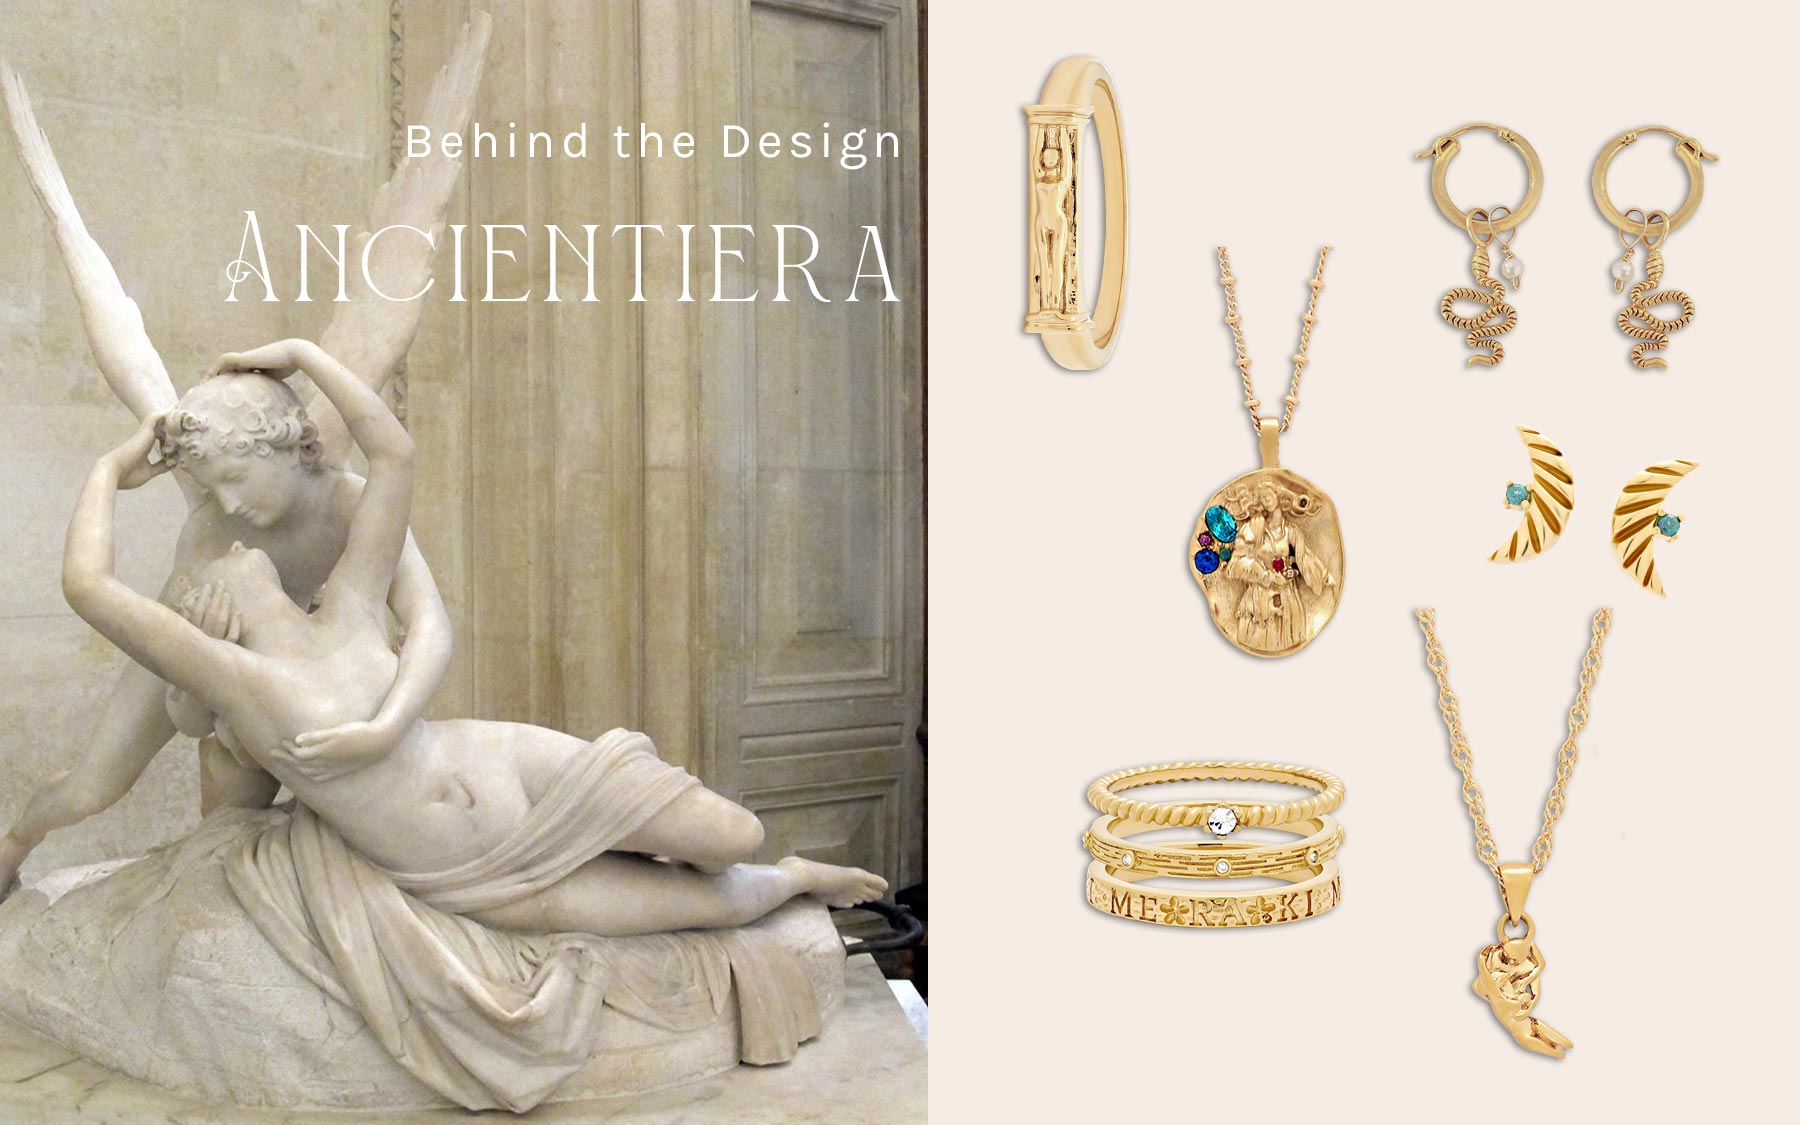 BEHIND THE DESIGN - Ancientiera Collection